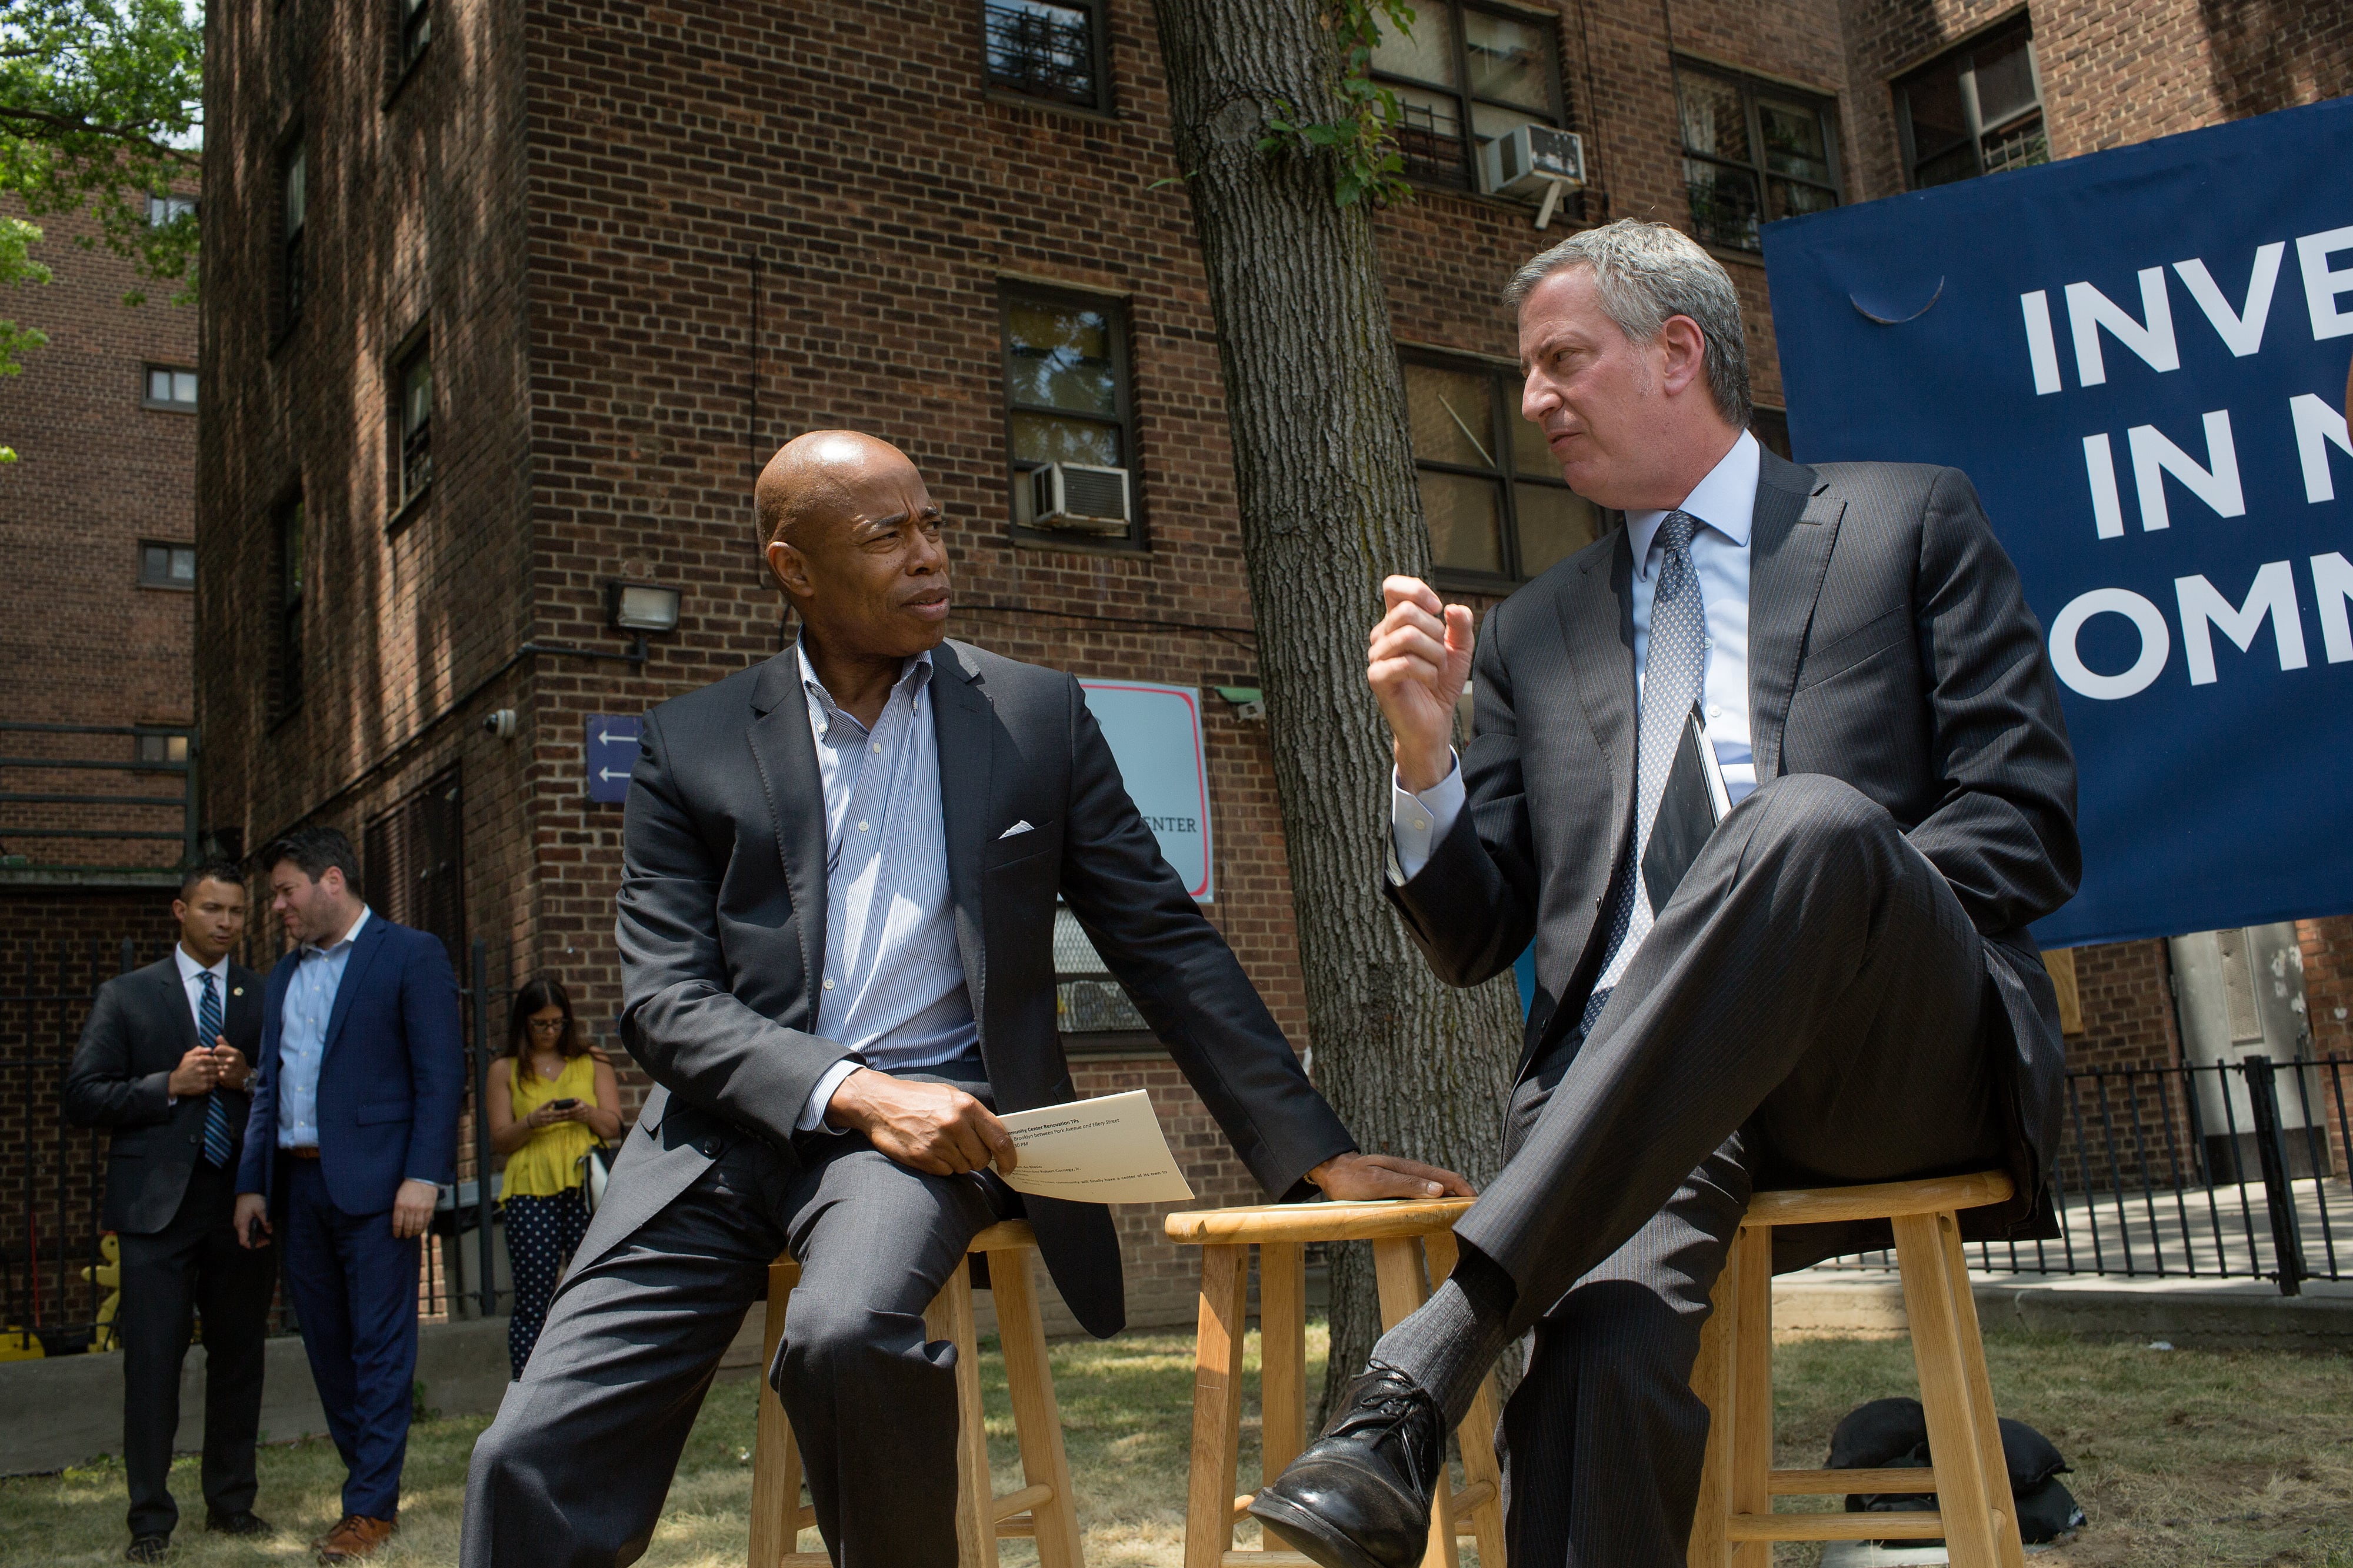 Eric Adams and Bill de Blasio speak together while sitting on wooden stools in front of a large brick building.